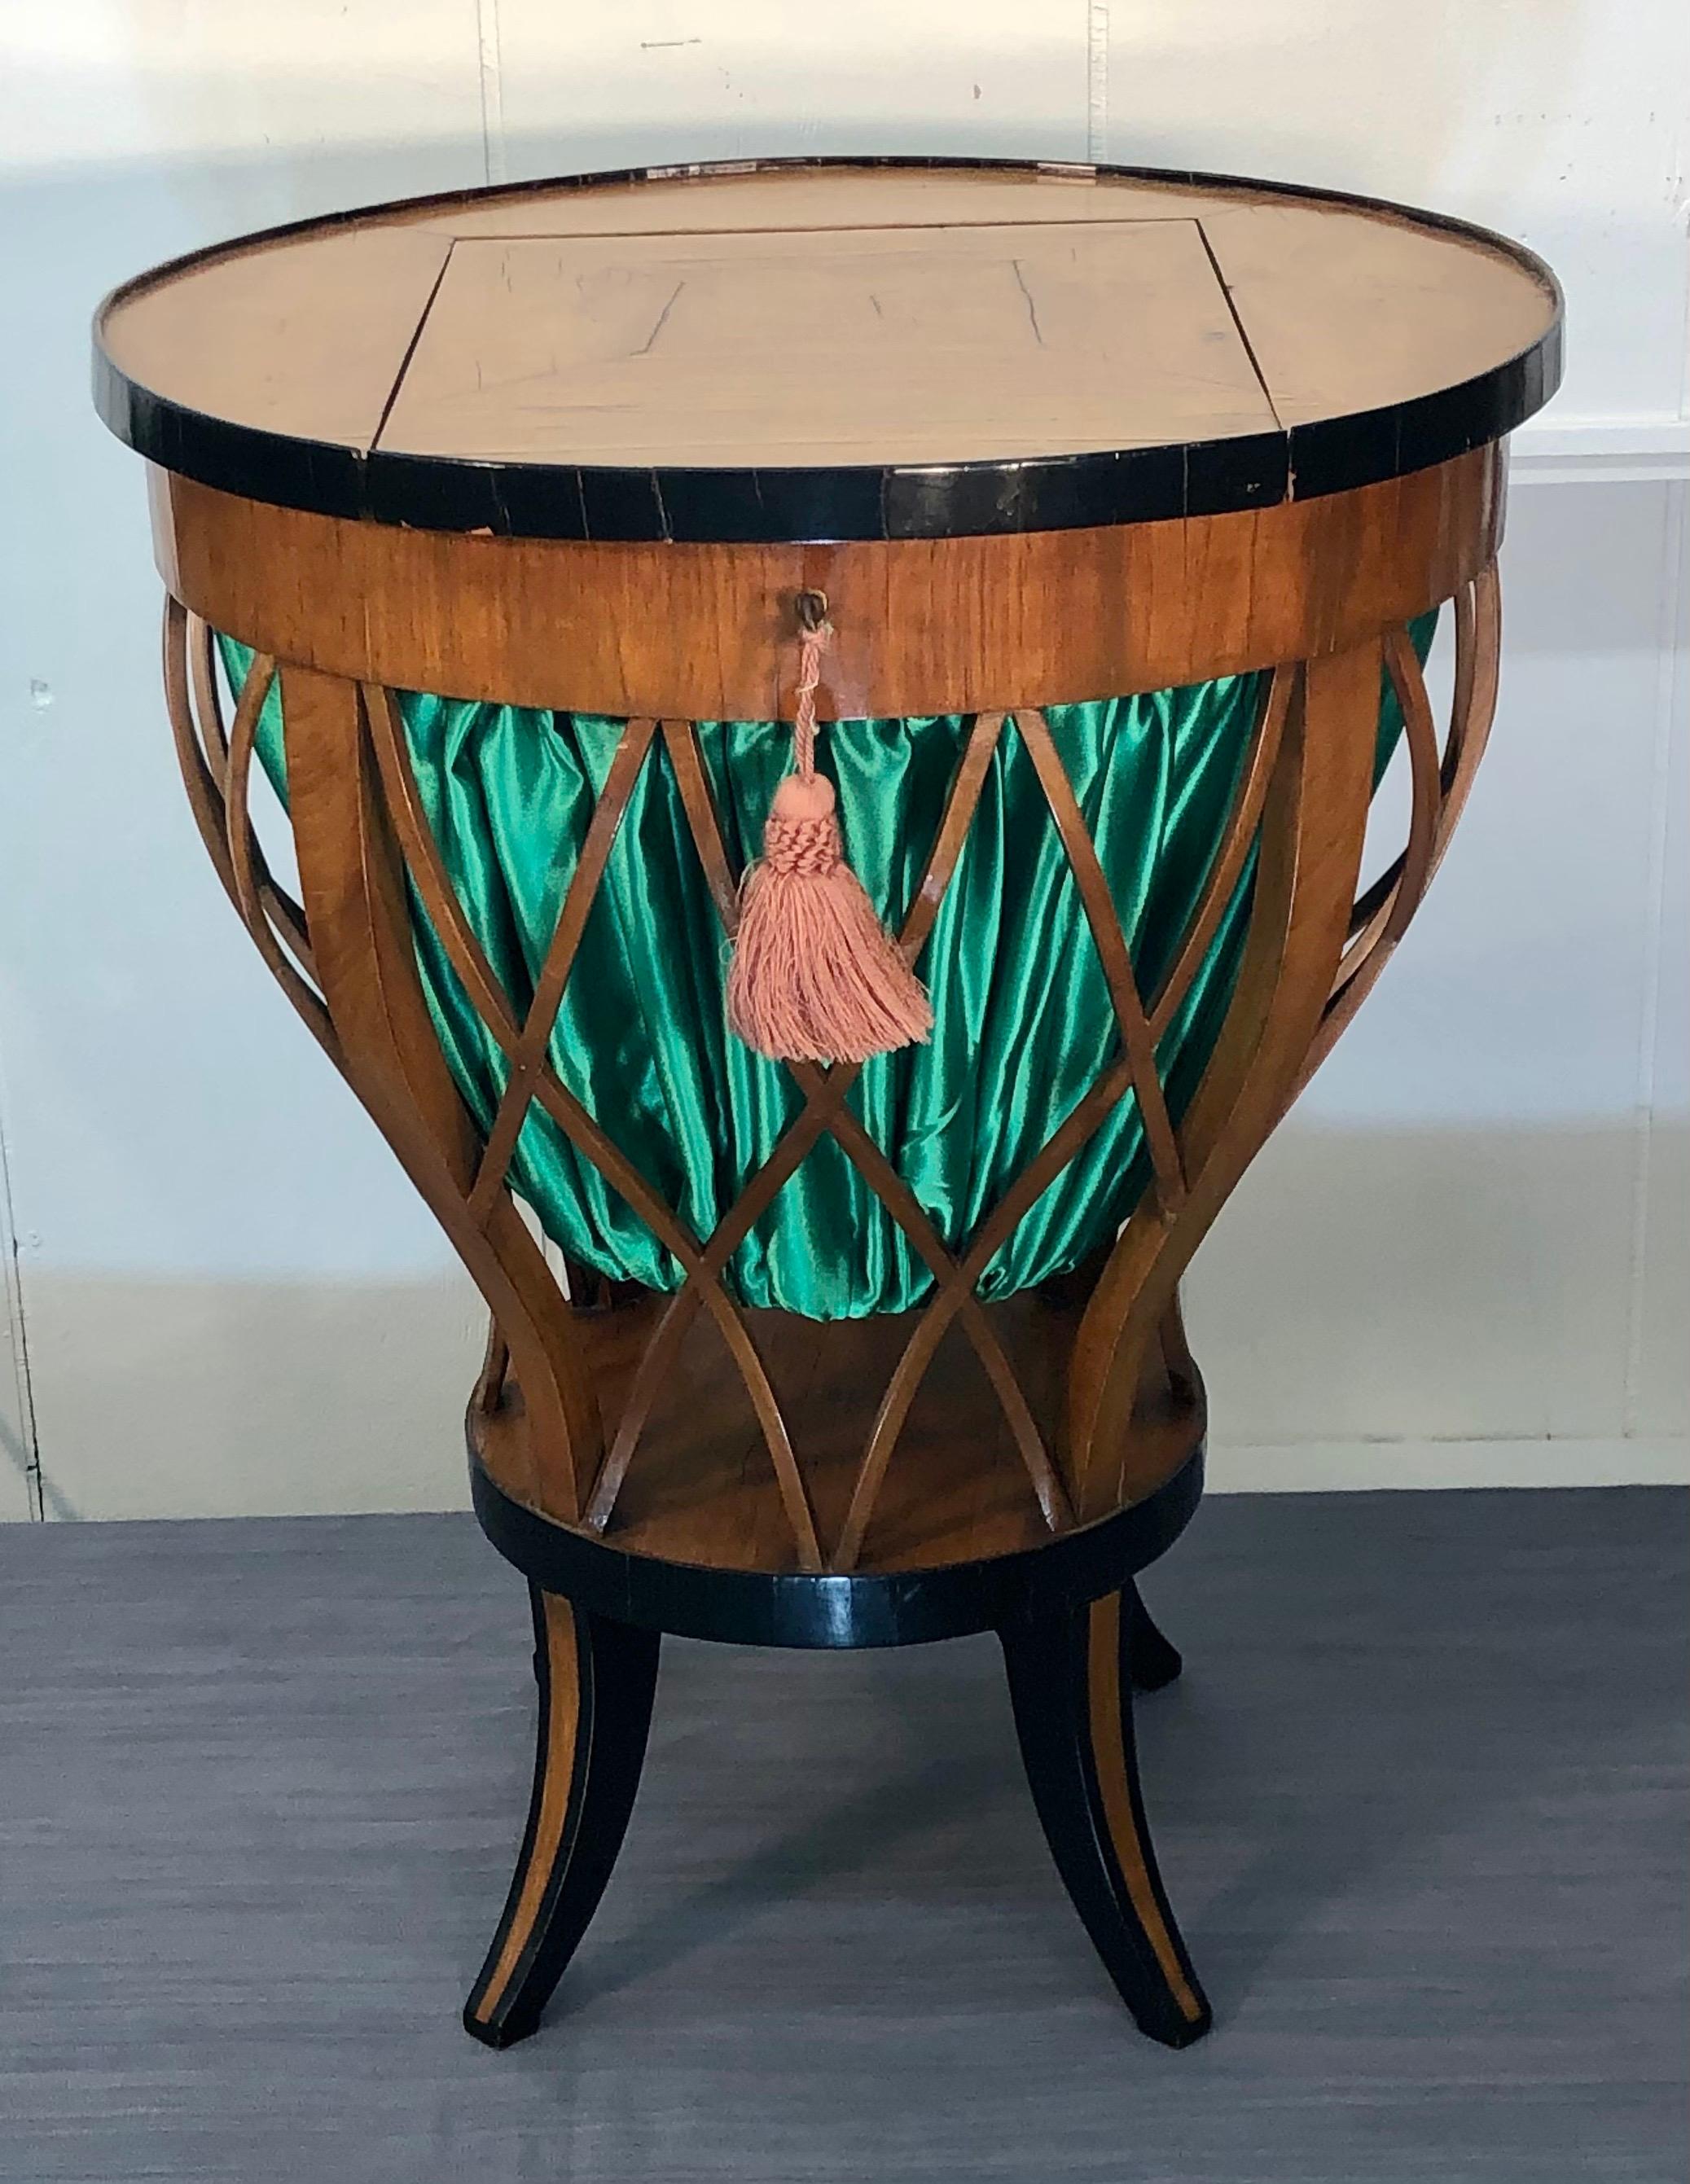 Fashionable South German Biedermeier cherry-veneer and ebonized work table / sewing table. Round cherry-veneered top surrounded by ebonized ring with a hinged door to access the green silk basket enclosed with in solid cherry lattice work. The legs